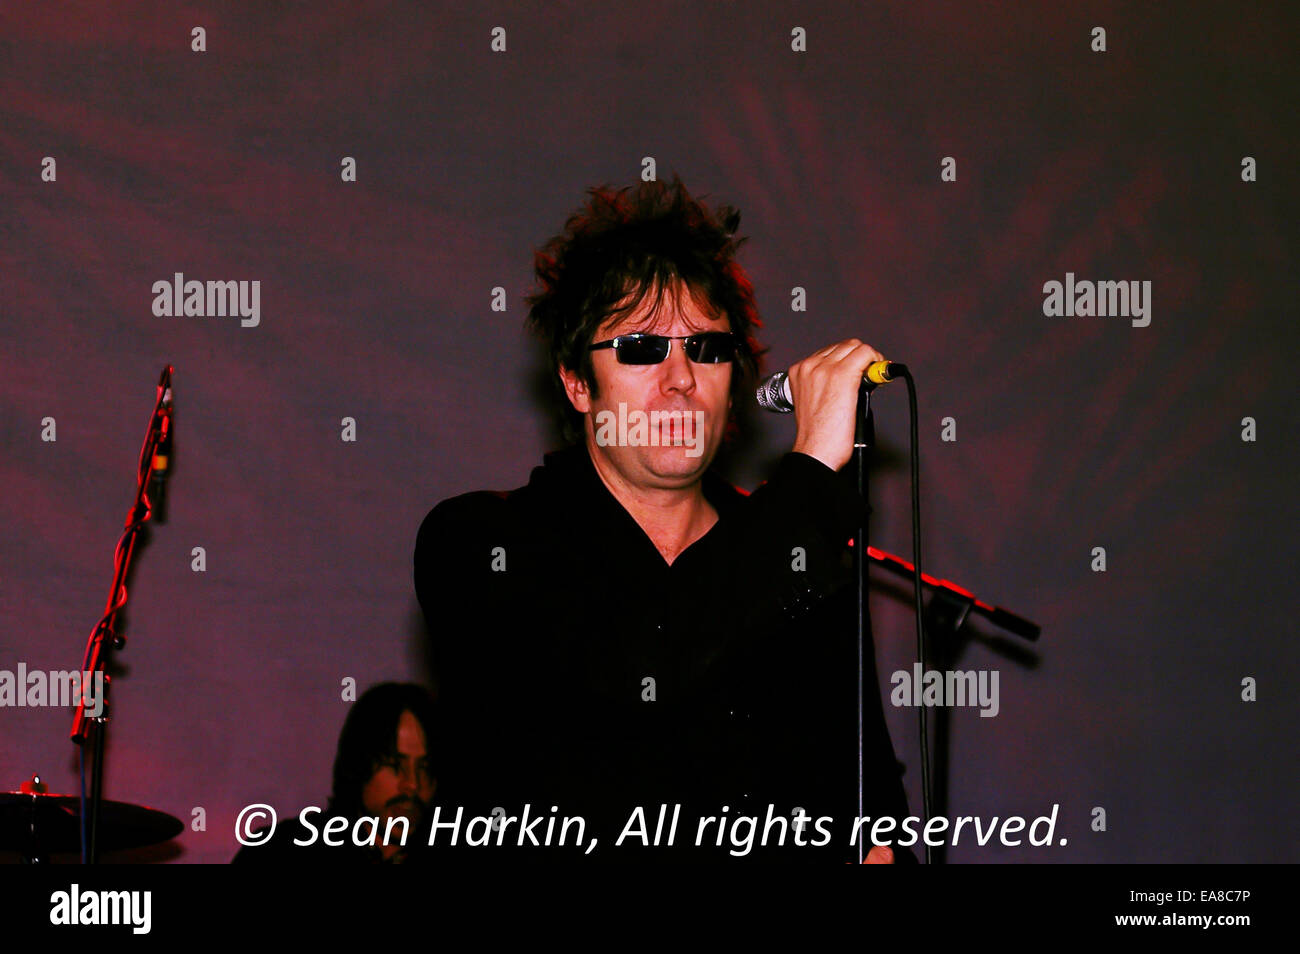 Belfast, Ireland. 12th August 2012. Echo and the Bunnymen play Belfast Feile Stock Photo